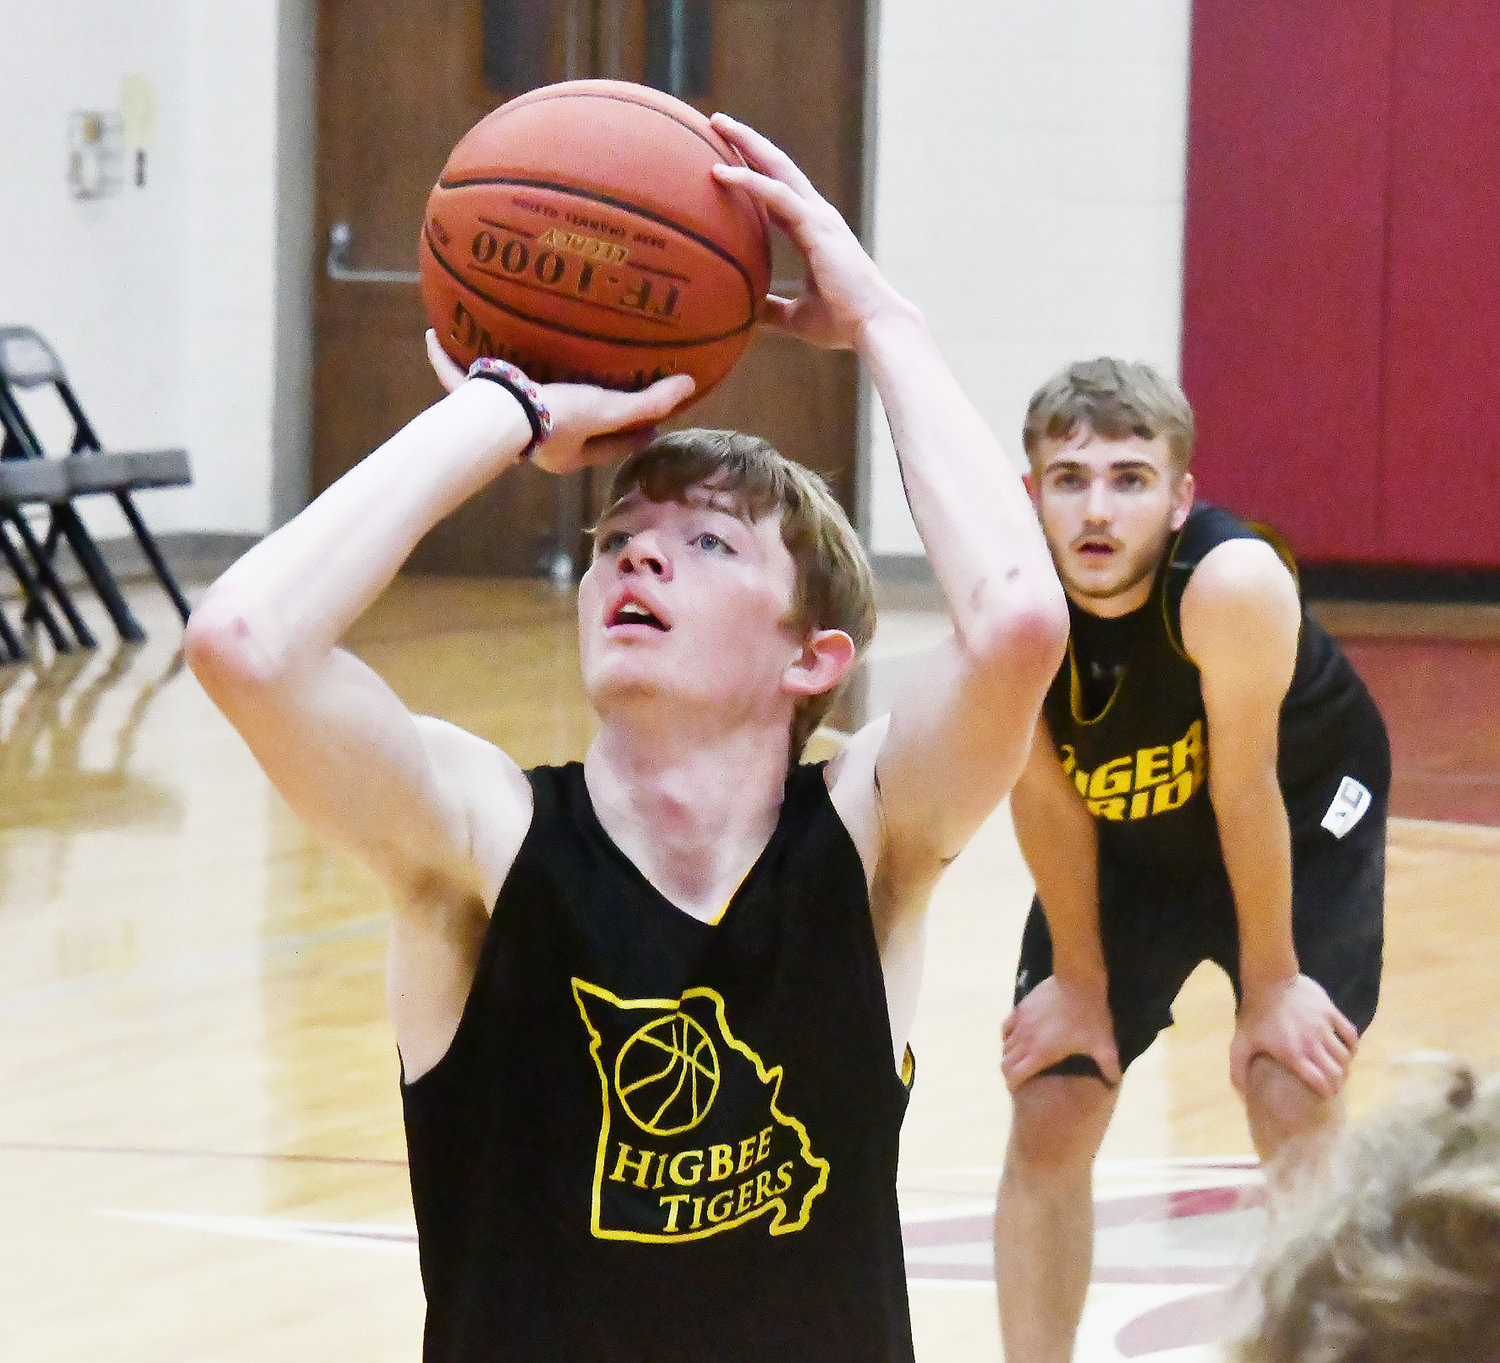 Higbee's Chad Crawford shoots a free throw while teammate Chevy Grimsley looks on.